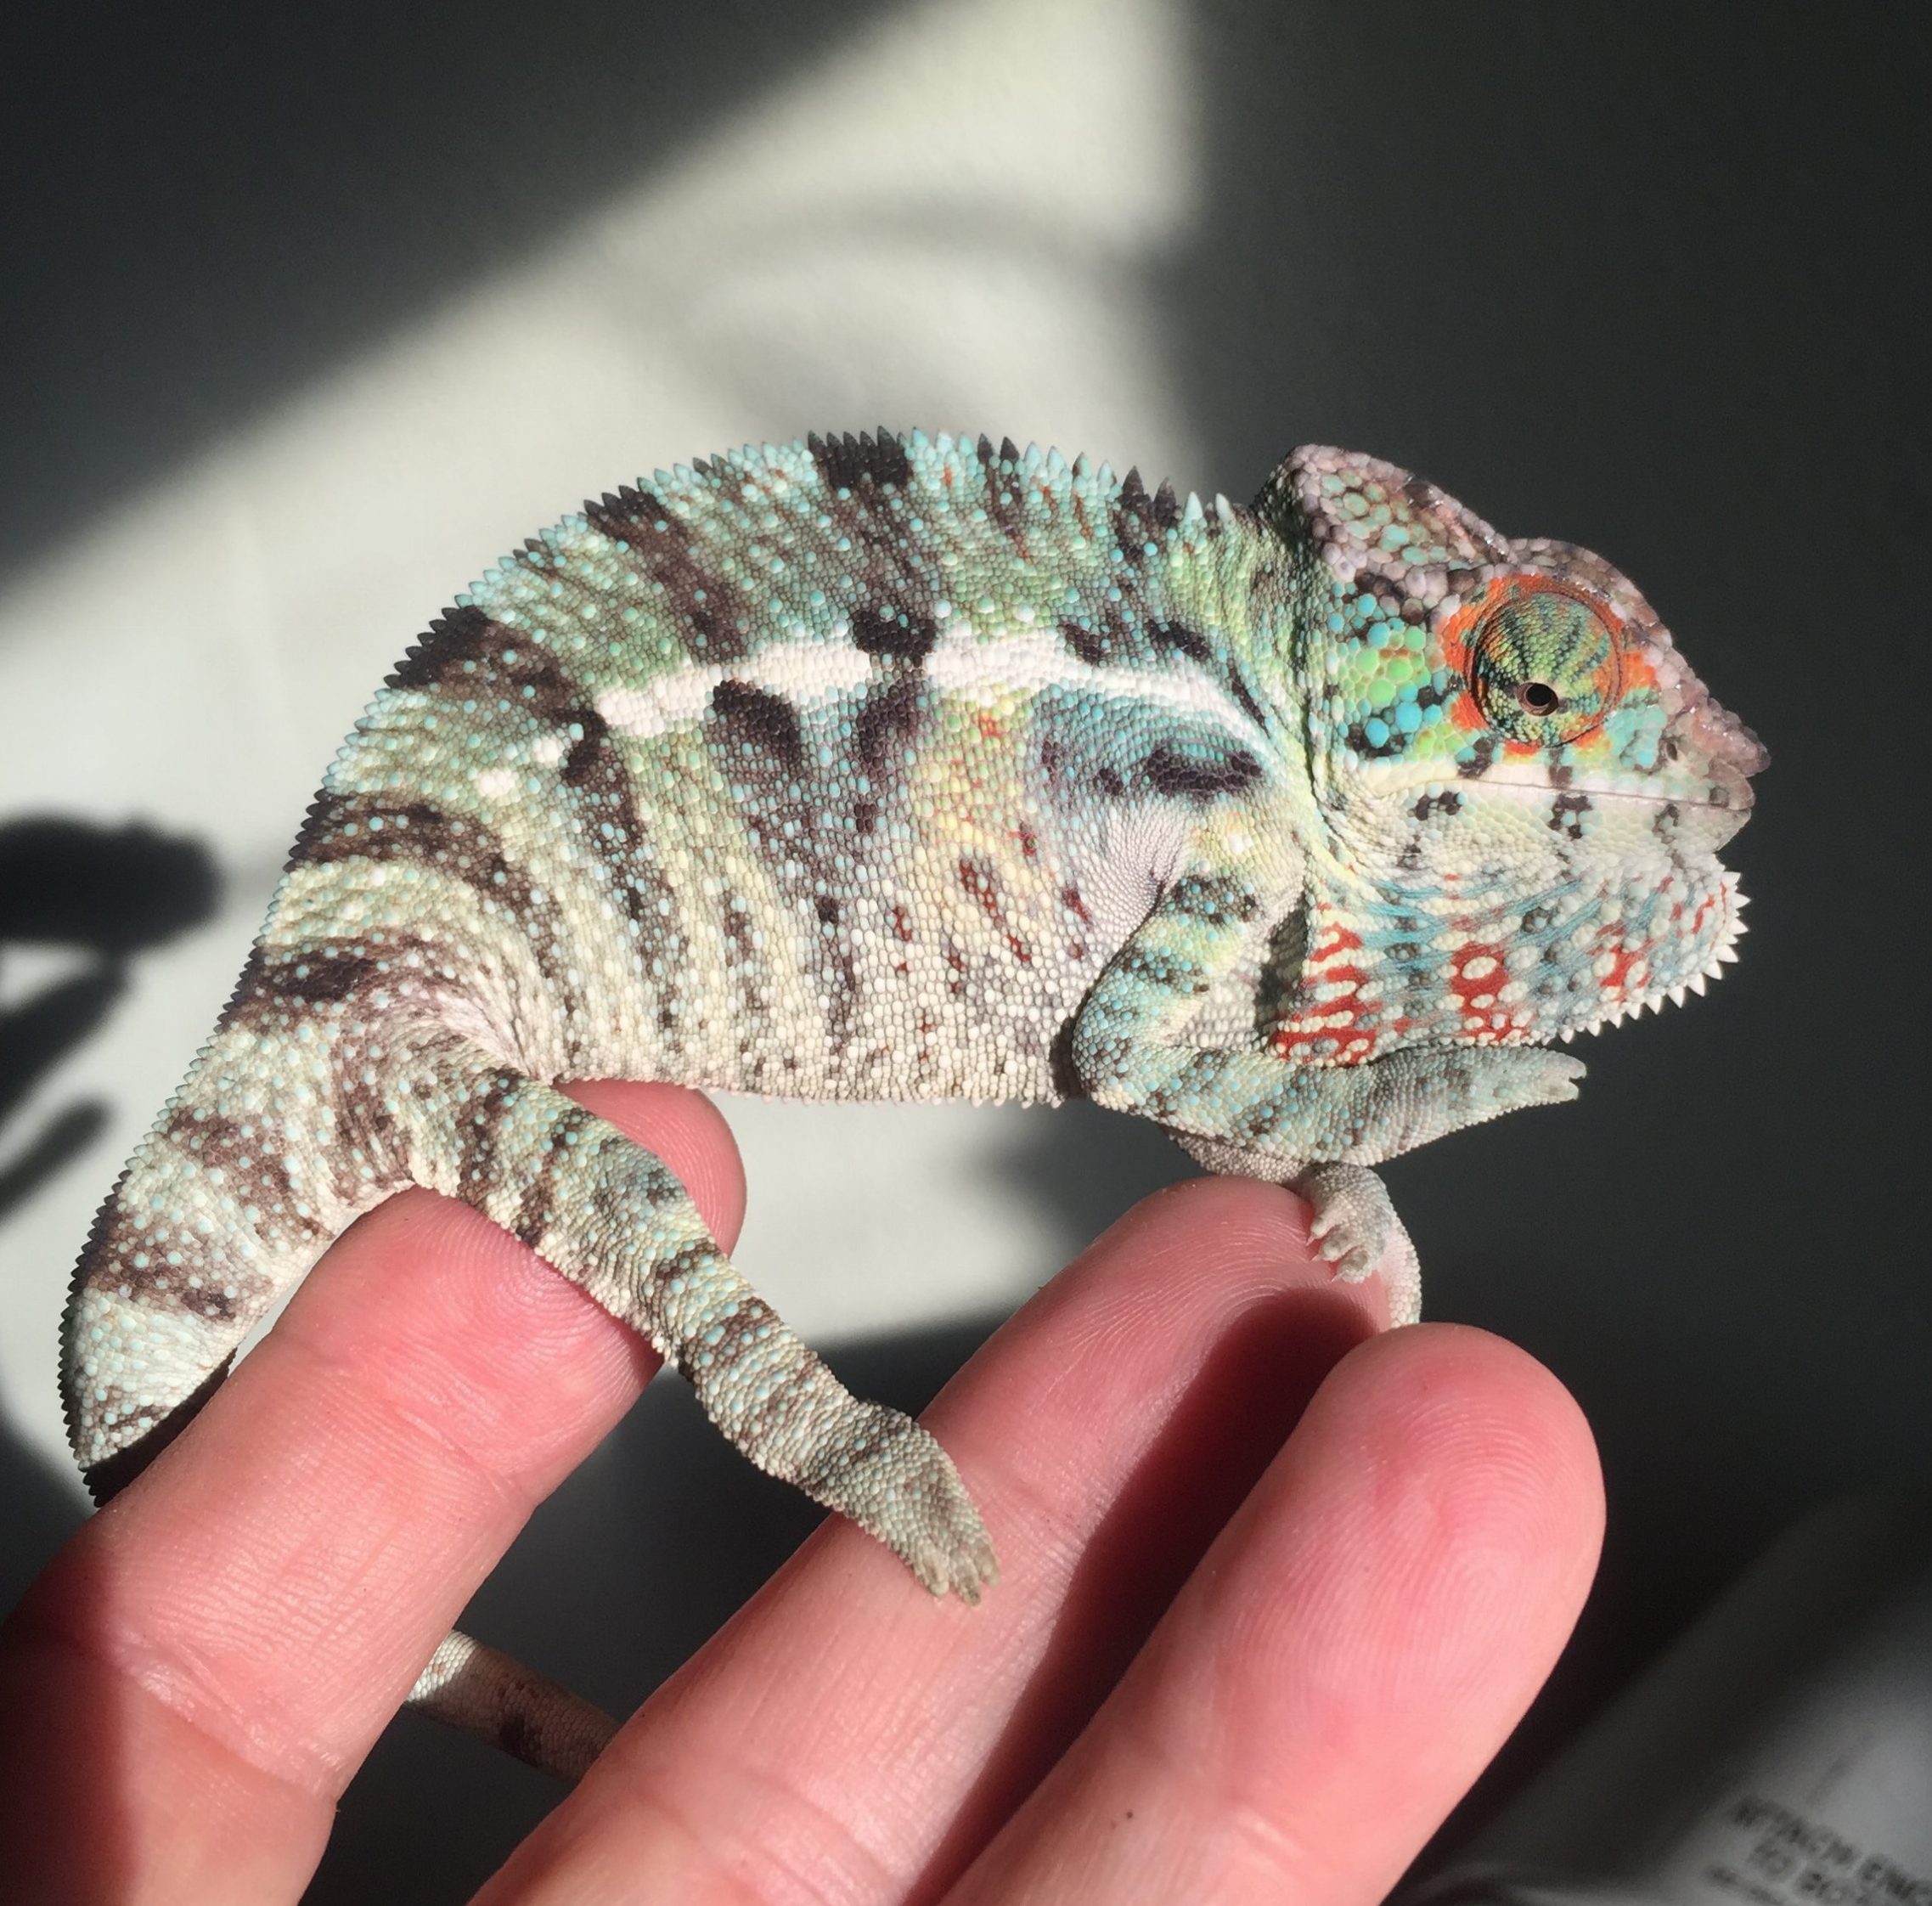 Nosy Be Panther Male Hatch Date 5/28/16 - Chamelicious Chameleons